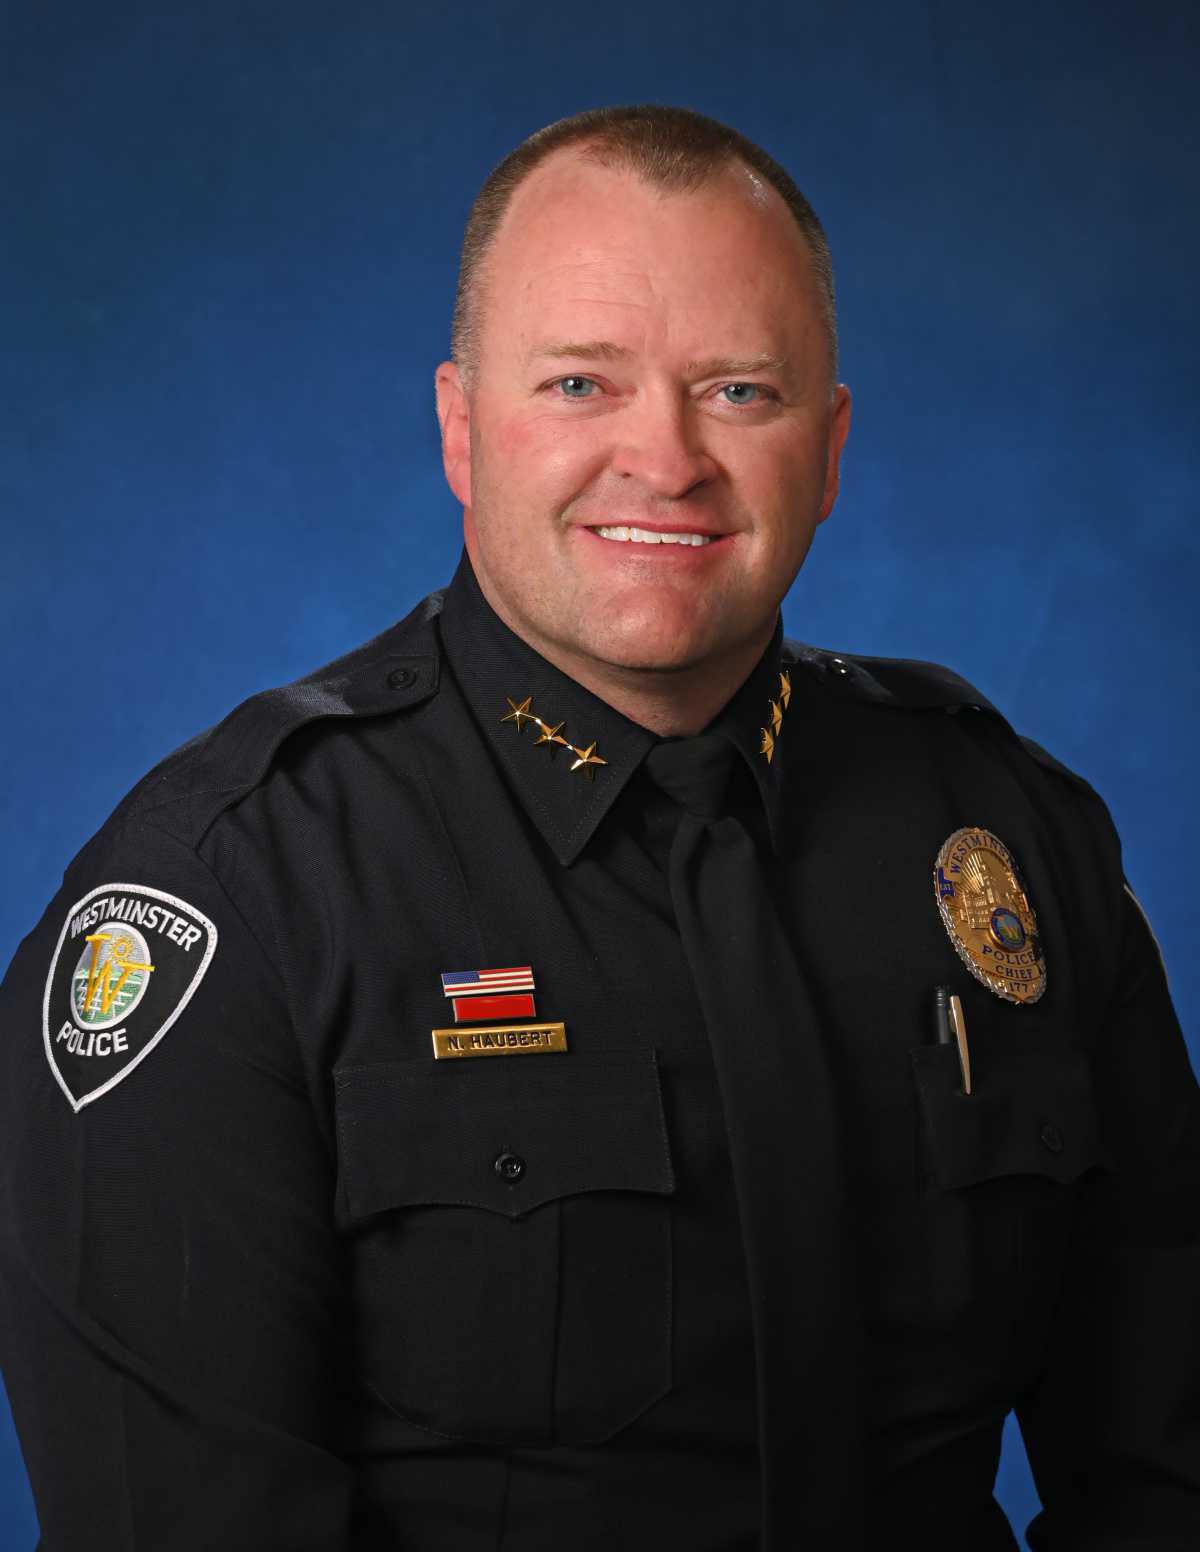 Norm Haubert Selected as Westminster’s Chief of Police